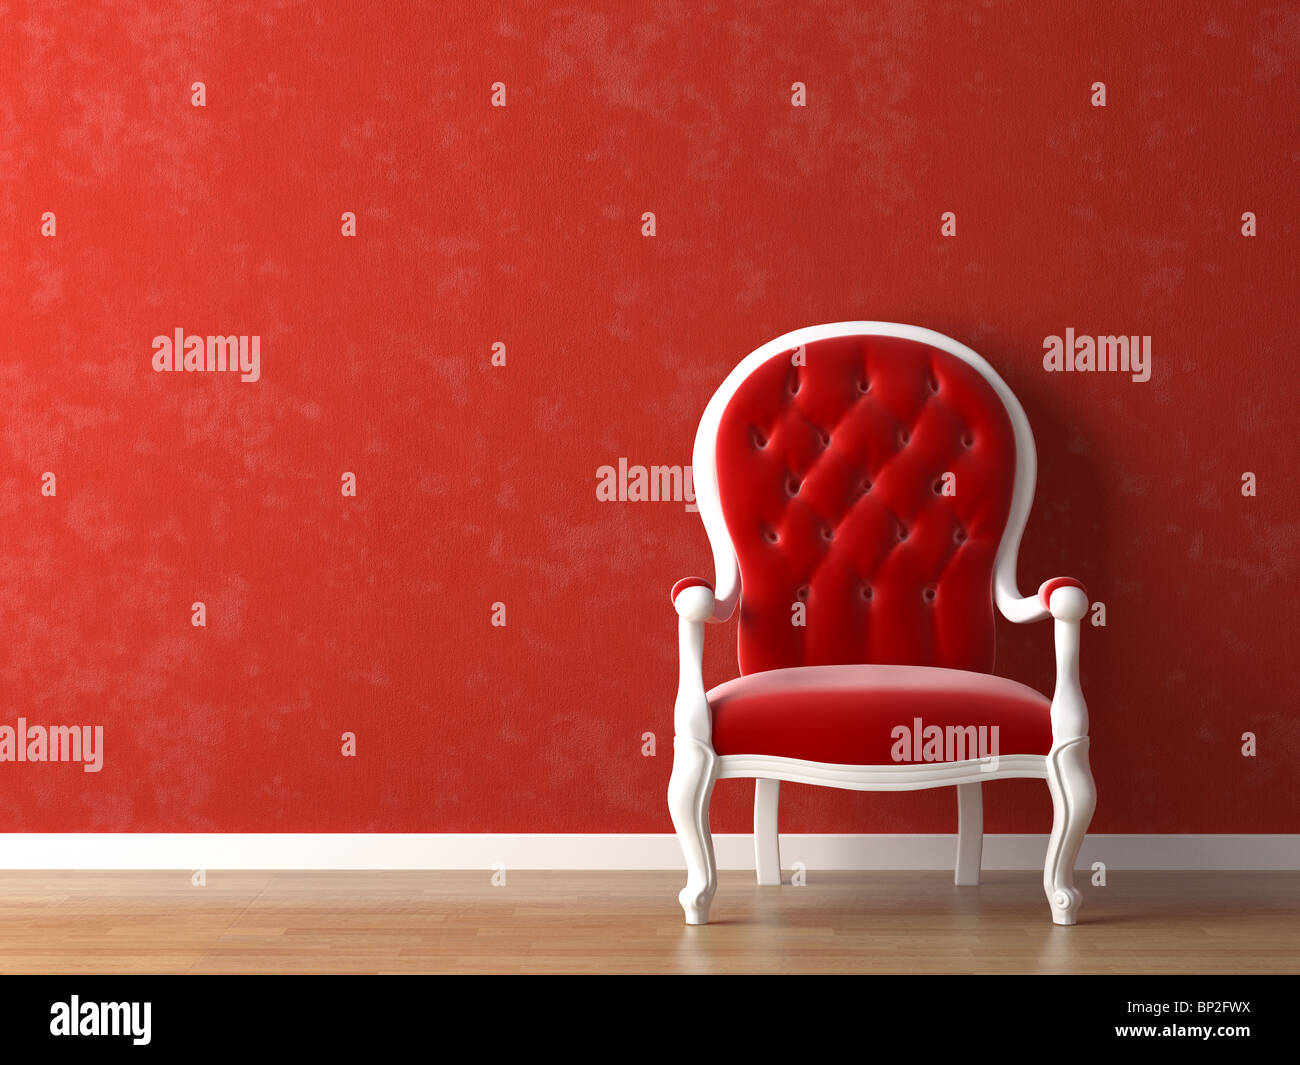 red and white interior design with minimal elements Stock Photo